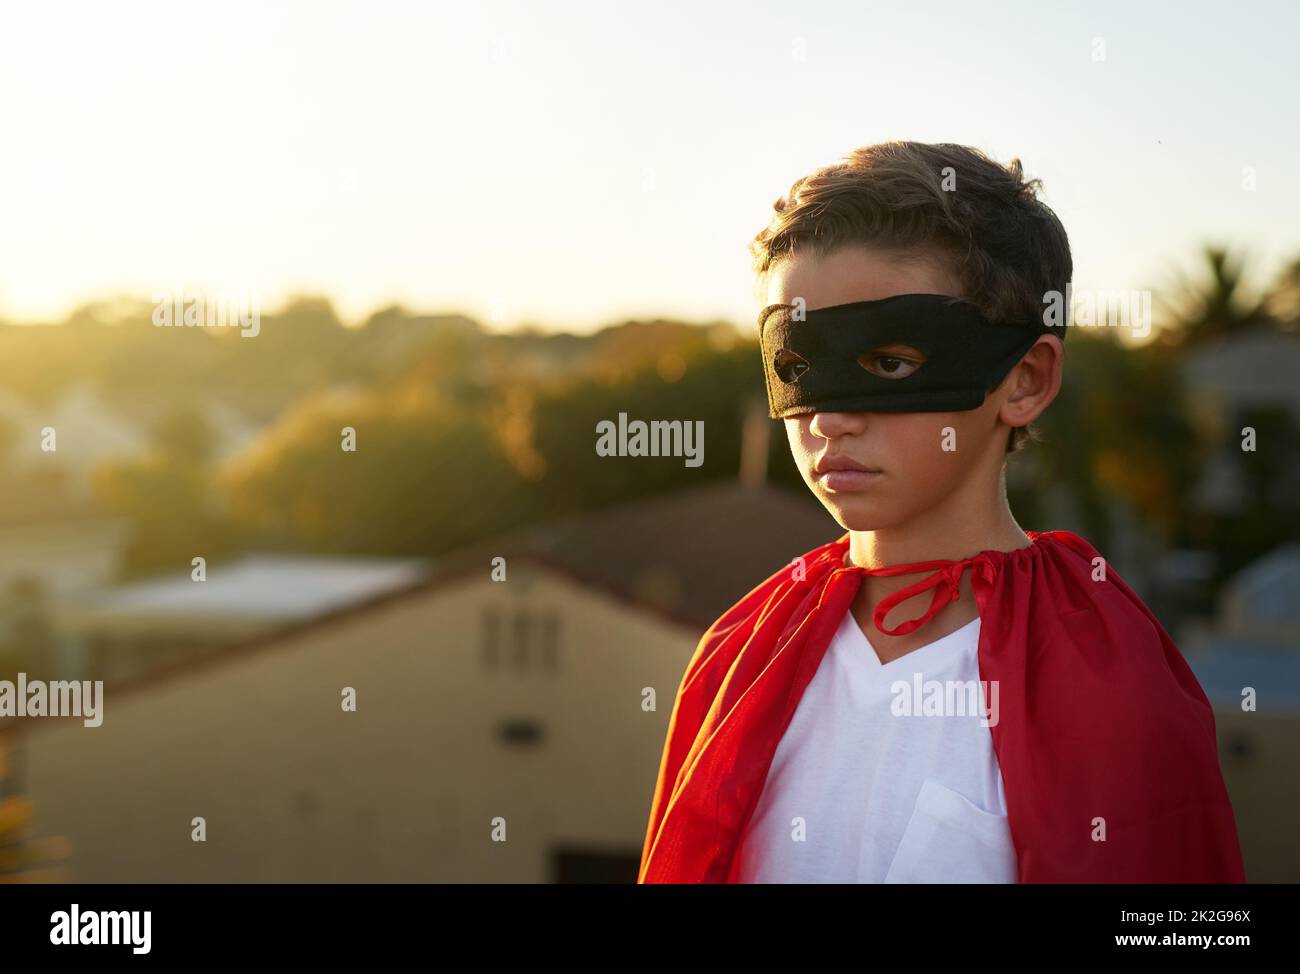 The city needs him. Shot of a young boy in a cape and mask playing superhero outside. Stock Photo